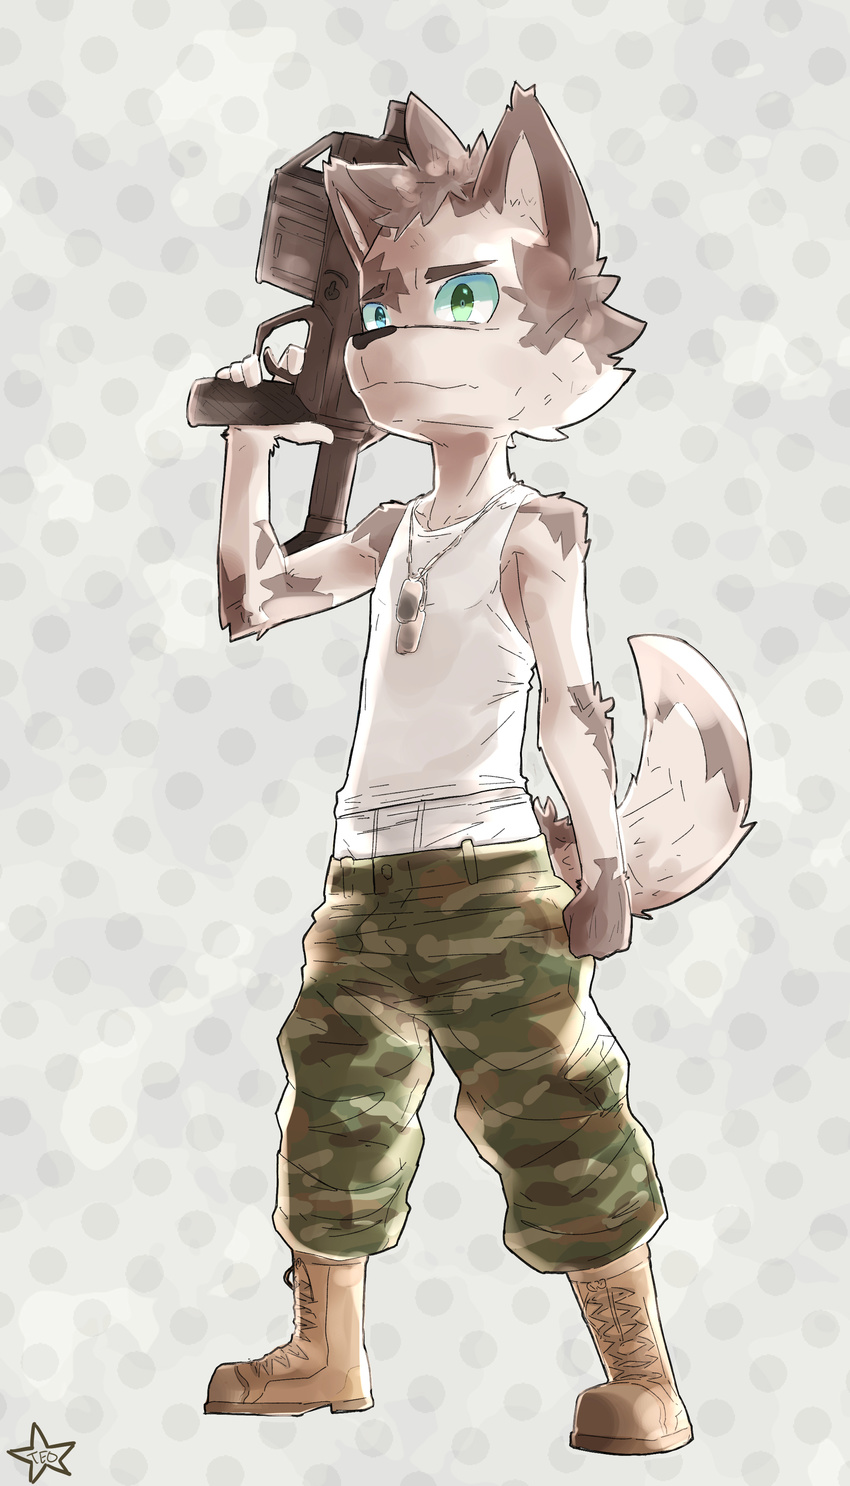 alternate_version_available blue_eyes boots briefs camo canine clothing cub dog_tags footwear front_view full-length_portrait green_eyes gun heterochromia holding_object holding_weapon hybridstaar male mammal pattern_background polka-dot_background portrait ranged_weapon sagging shirt signature simple_background solo standing tank_top teenager underwear unsure weapon wolf young